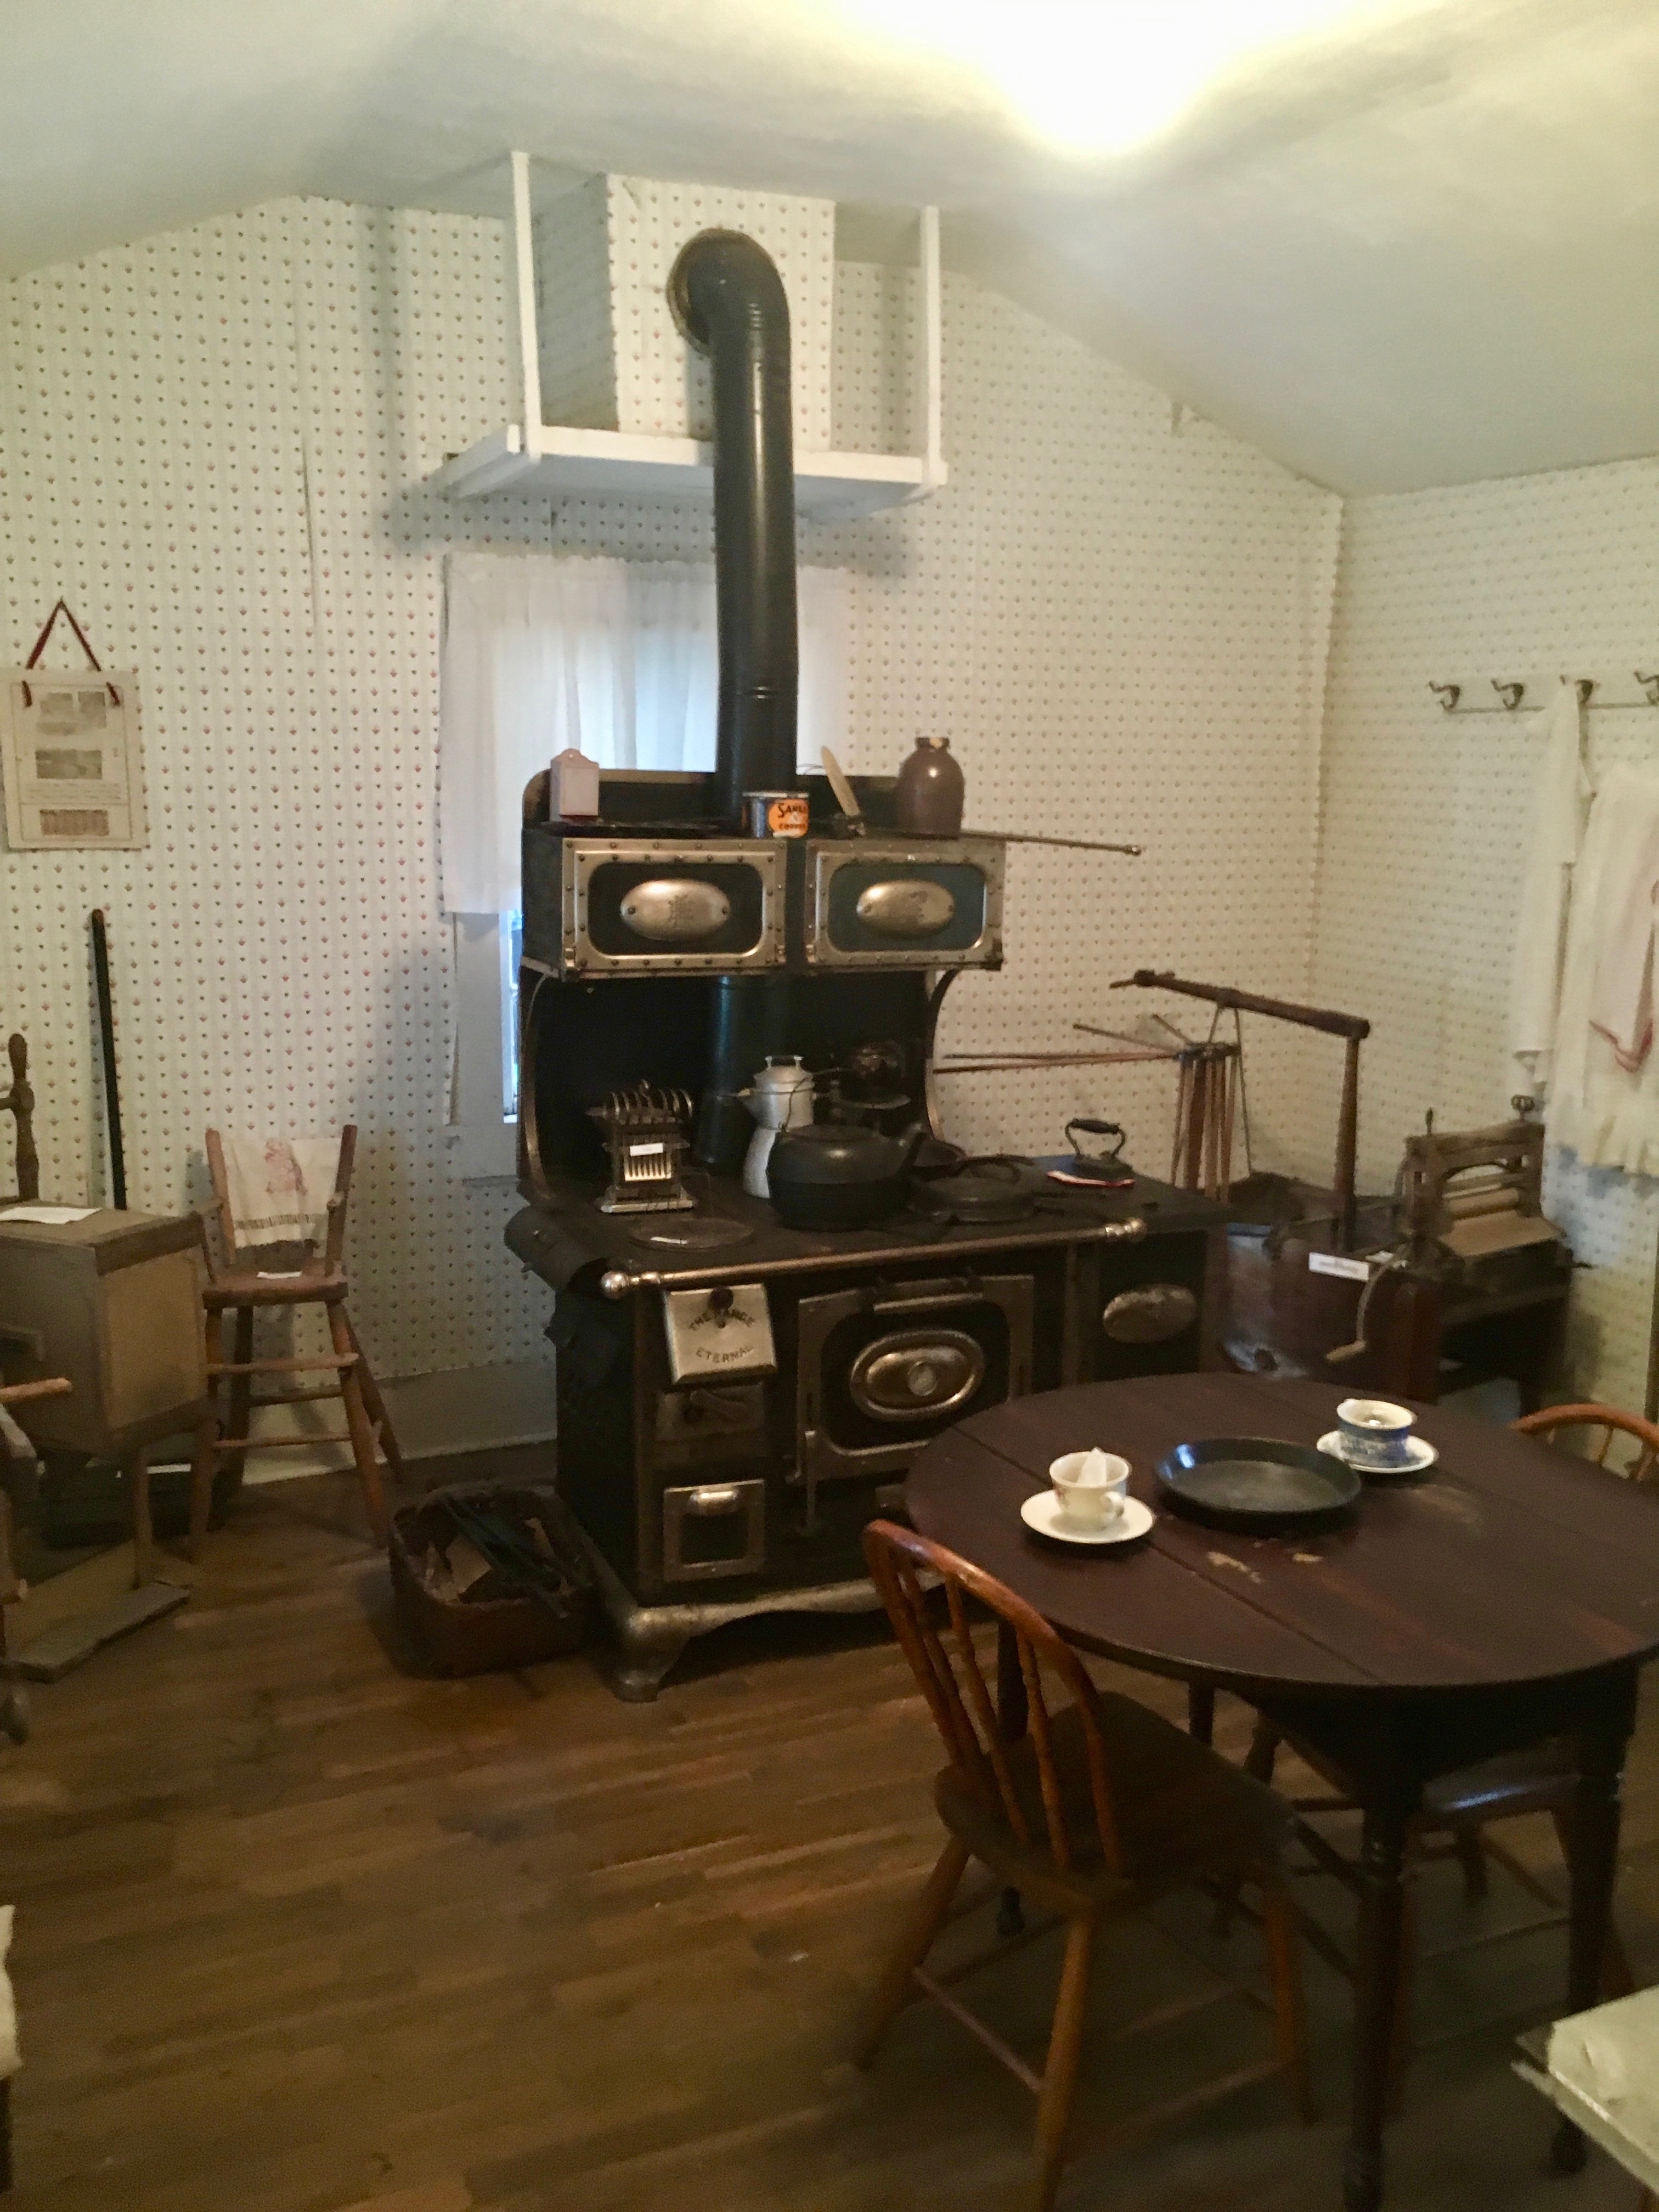 Hillsdale County Historical Society Museum: A look into the county’s history and early period